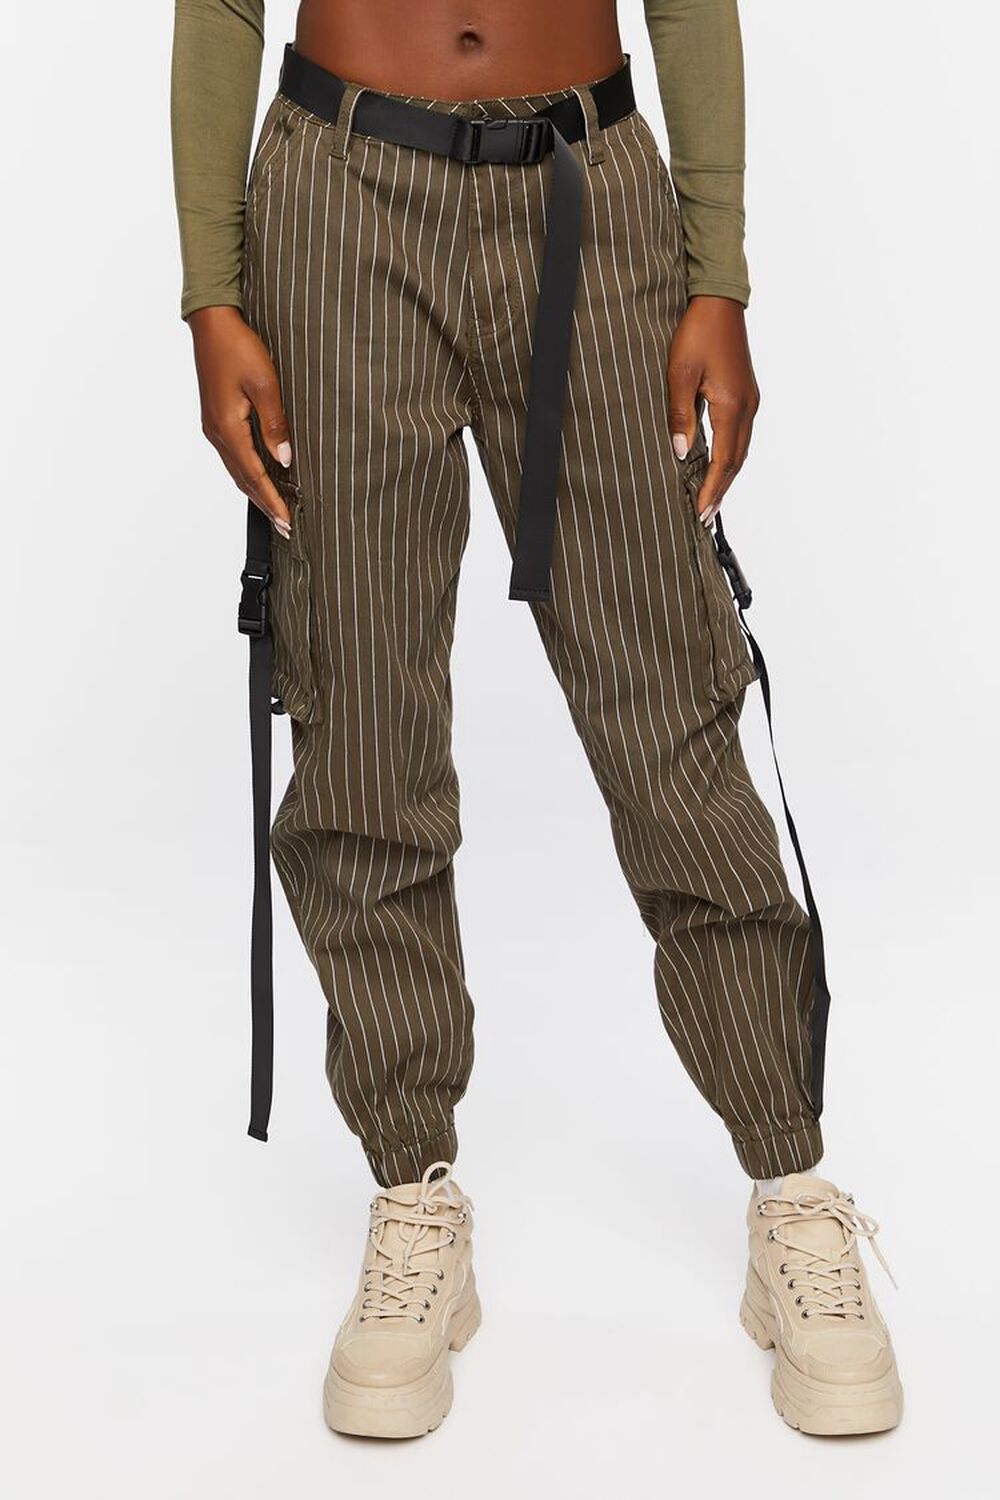 OLIVE/WHITE Pinstripe Belted Cargo Pants, image 2